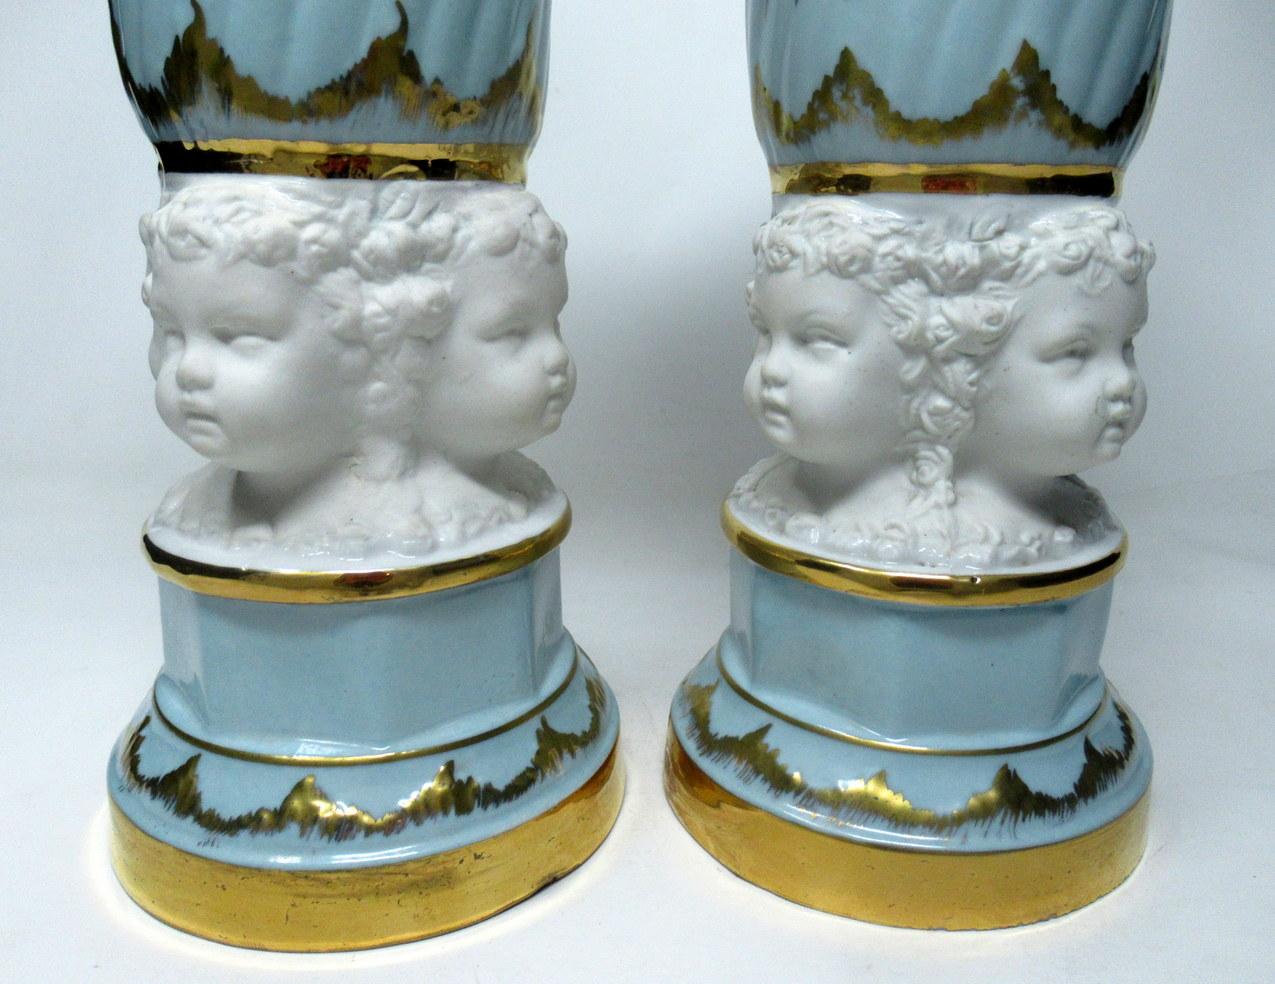 20th Century Pair of Midcentury Sèvres Style French Gilt Porcelain Bisque Parian Vases Urns For Sale